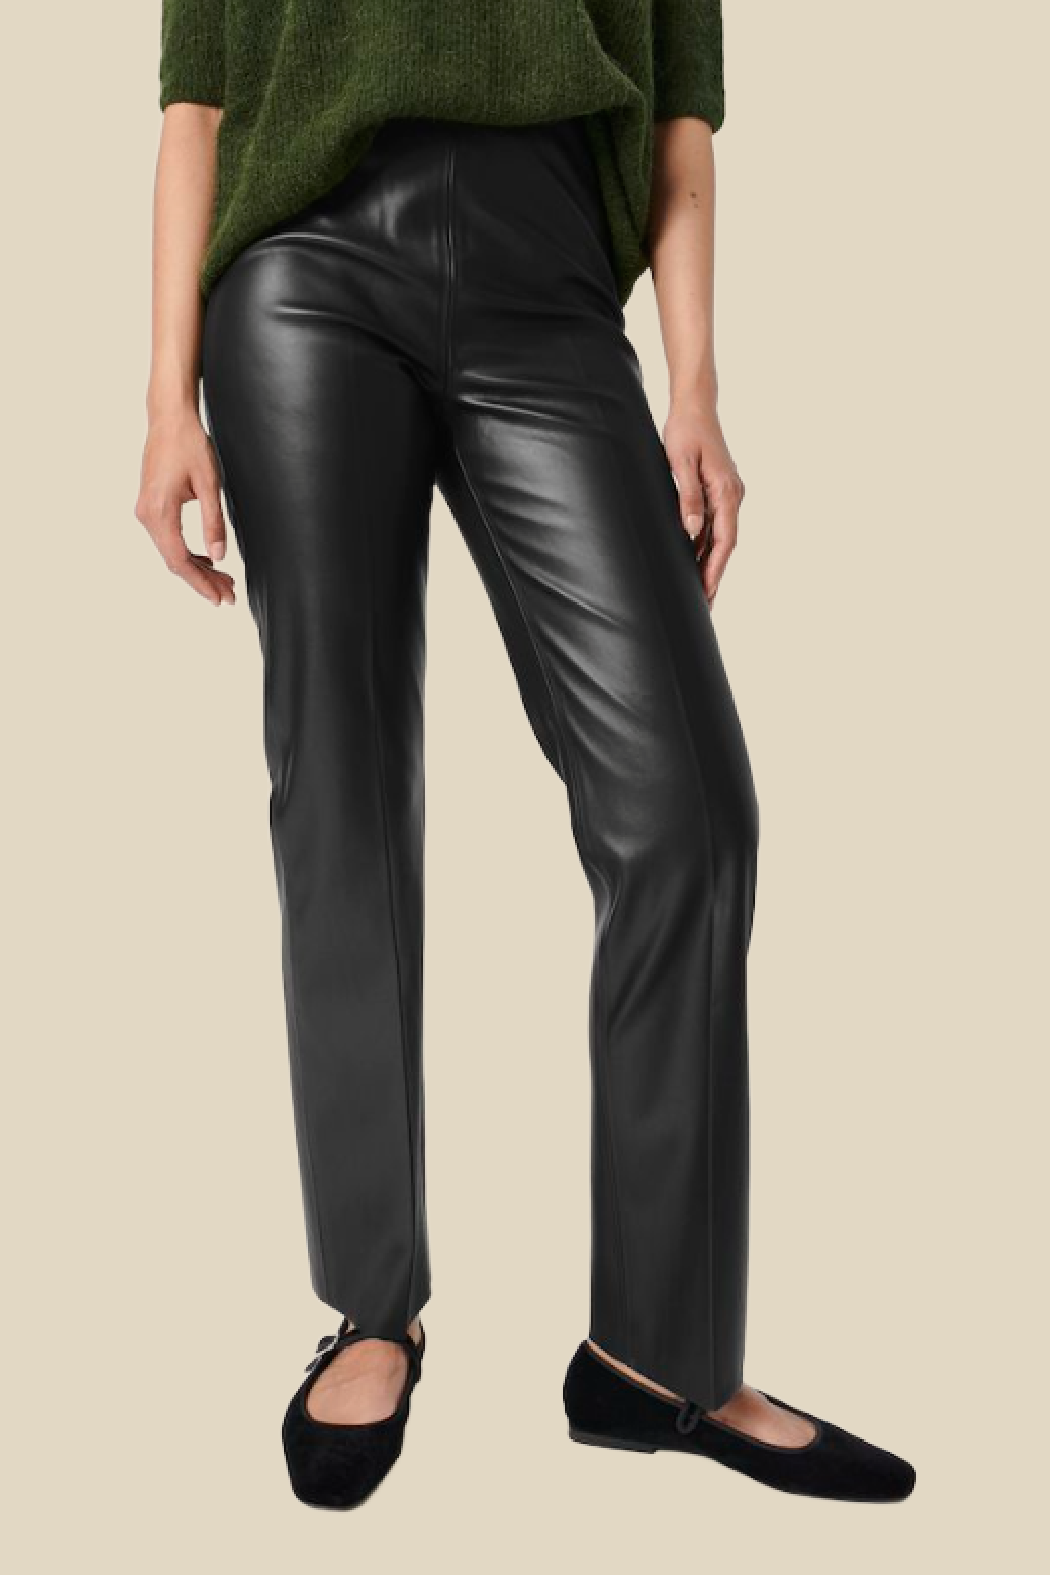 Kaylee Straight Faux Leather Pants